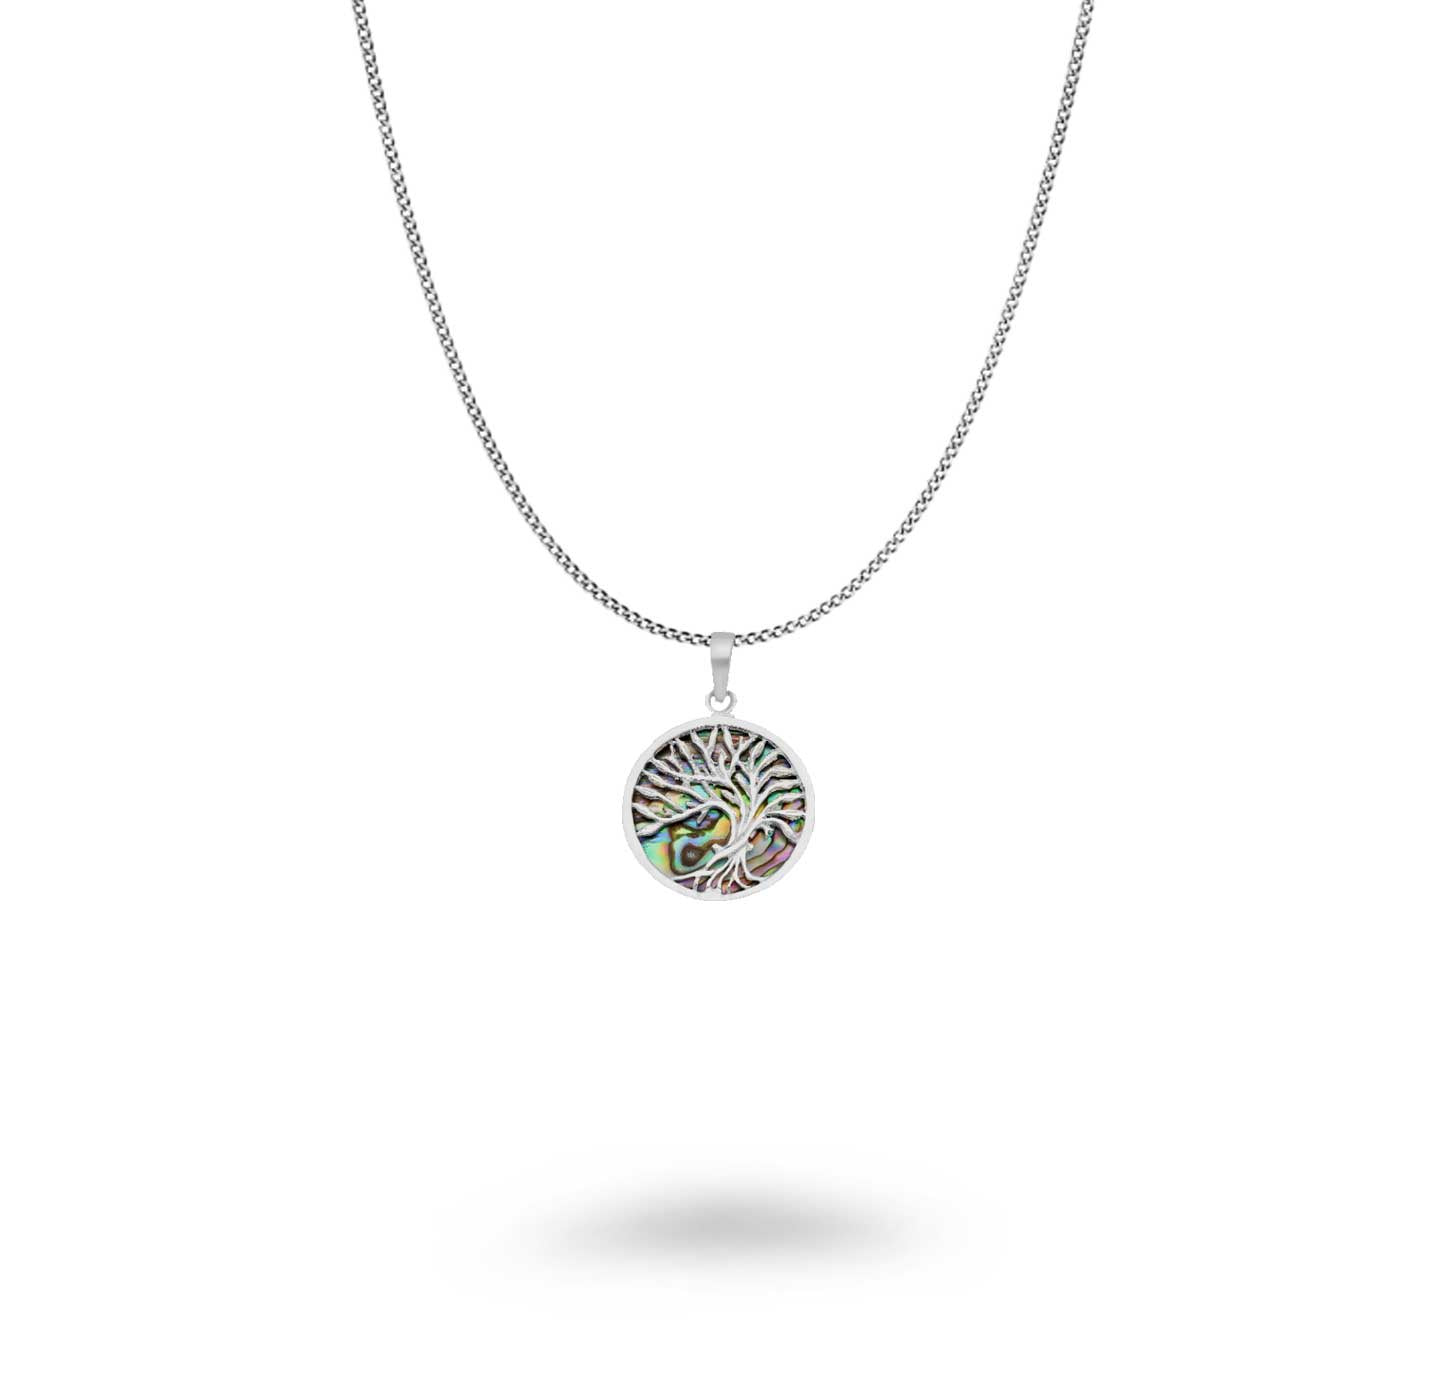 Round Charm Layered Necklace